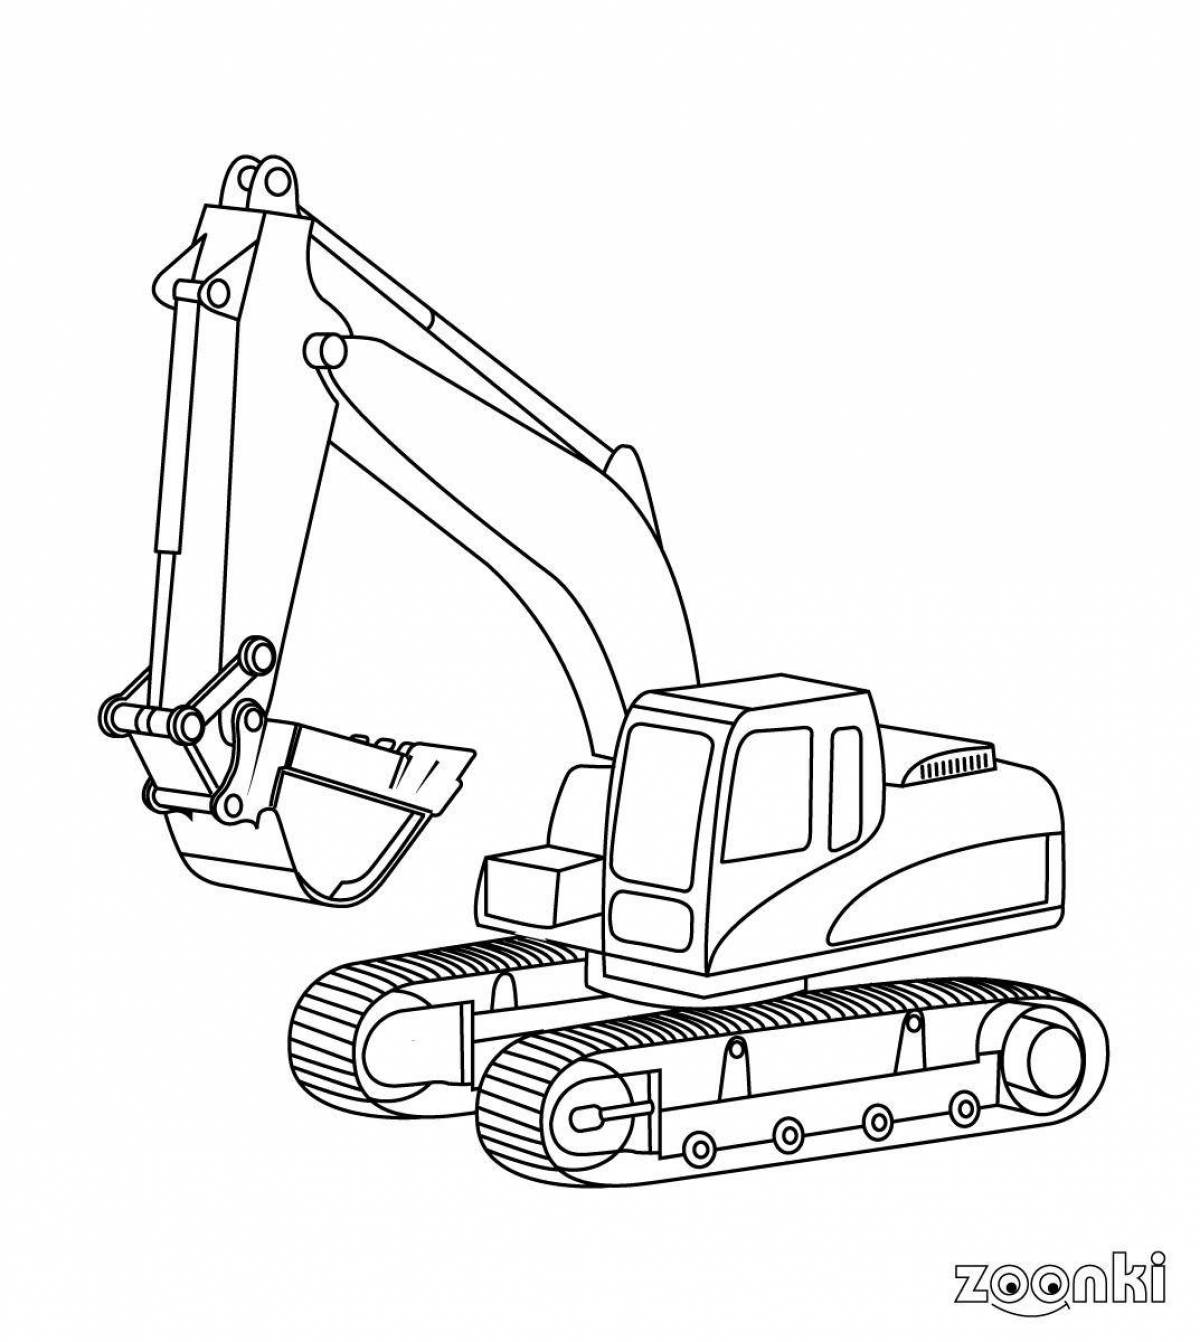 Fun excavator coloring book for 4-5 year olds